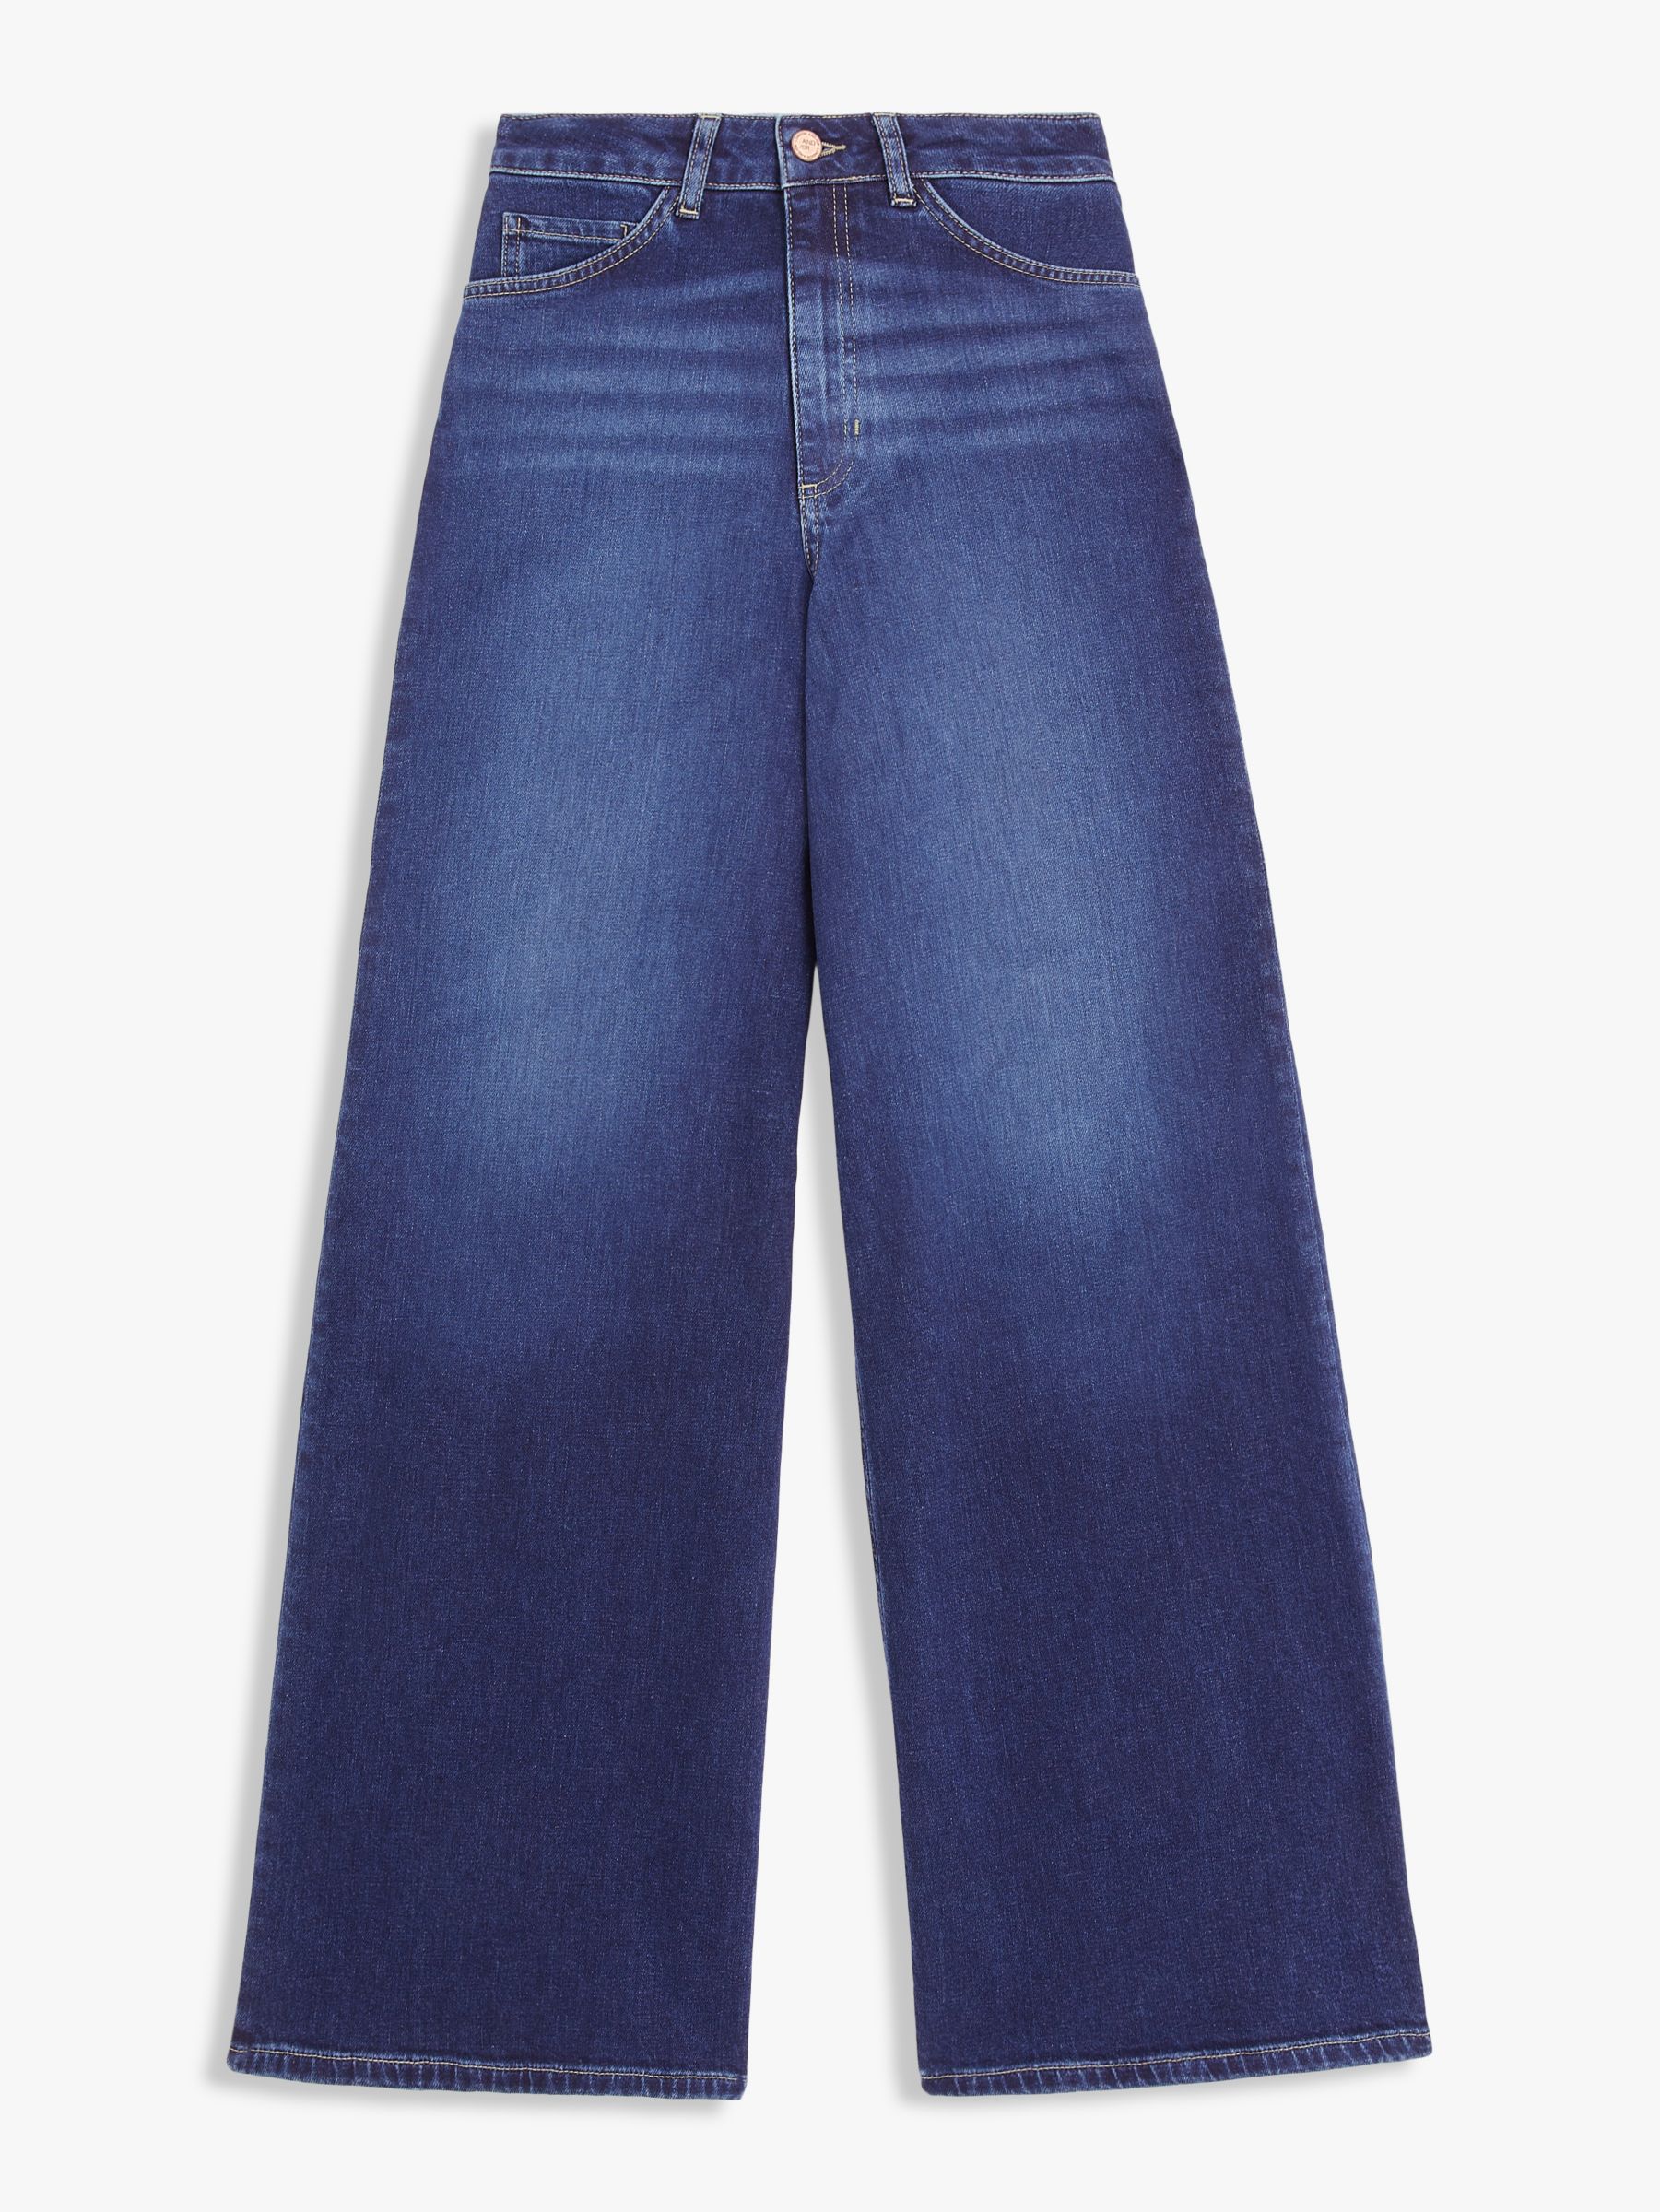 AND/OR Westlake Wide Leg Jeans, Blue, 26R